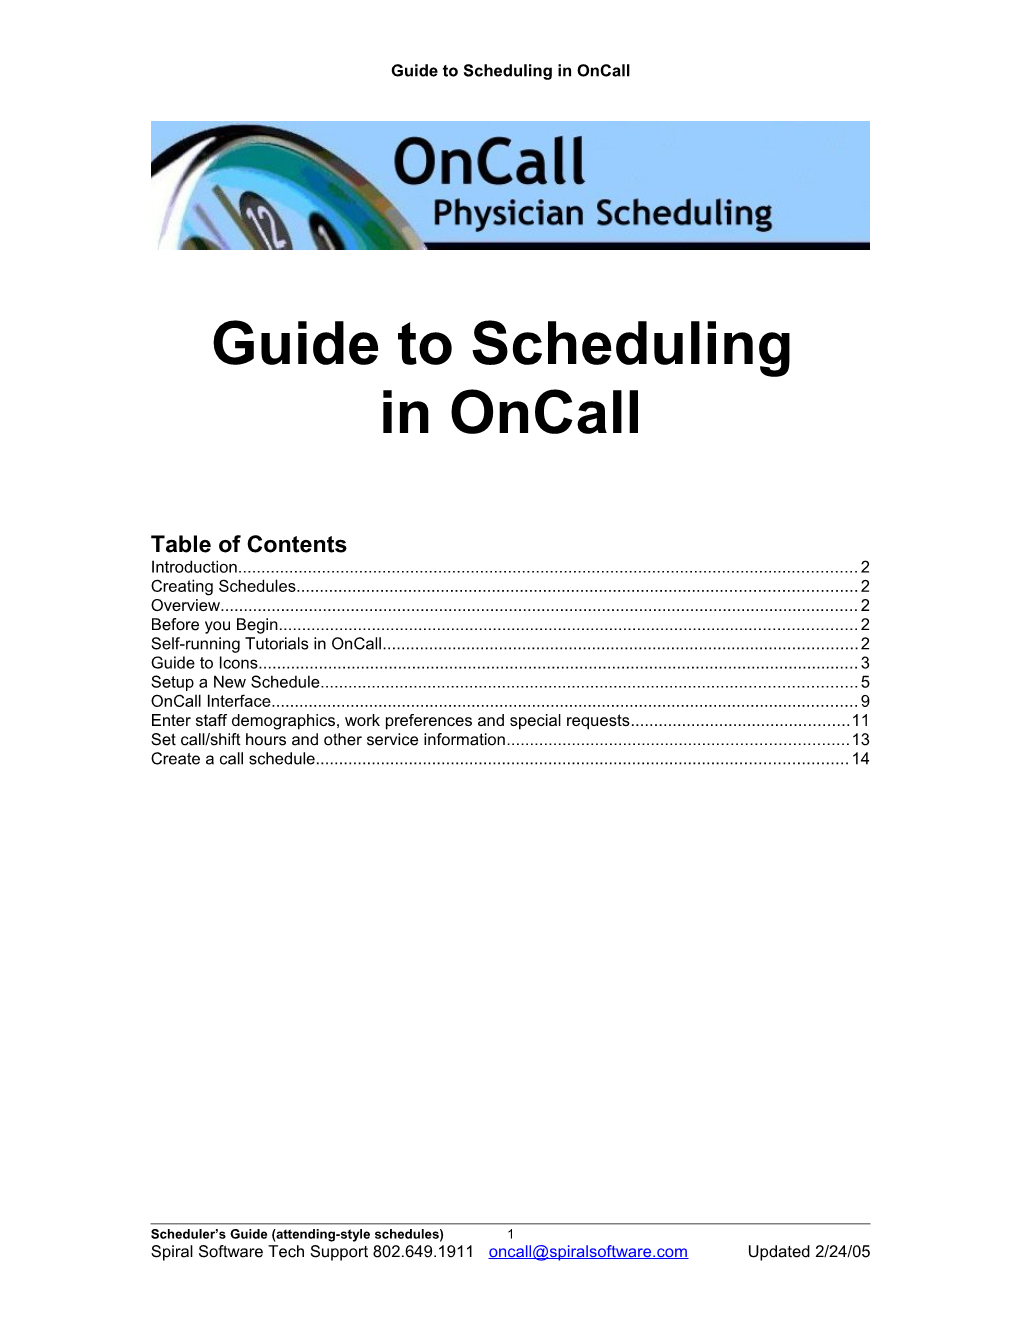 Guide to Scheduling in Oncall